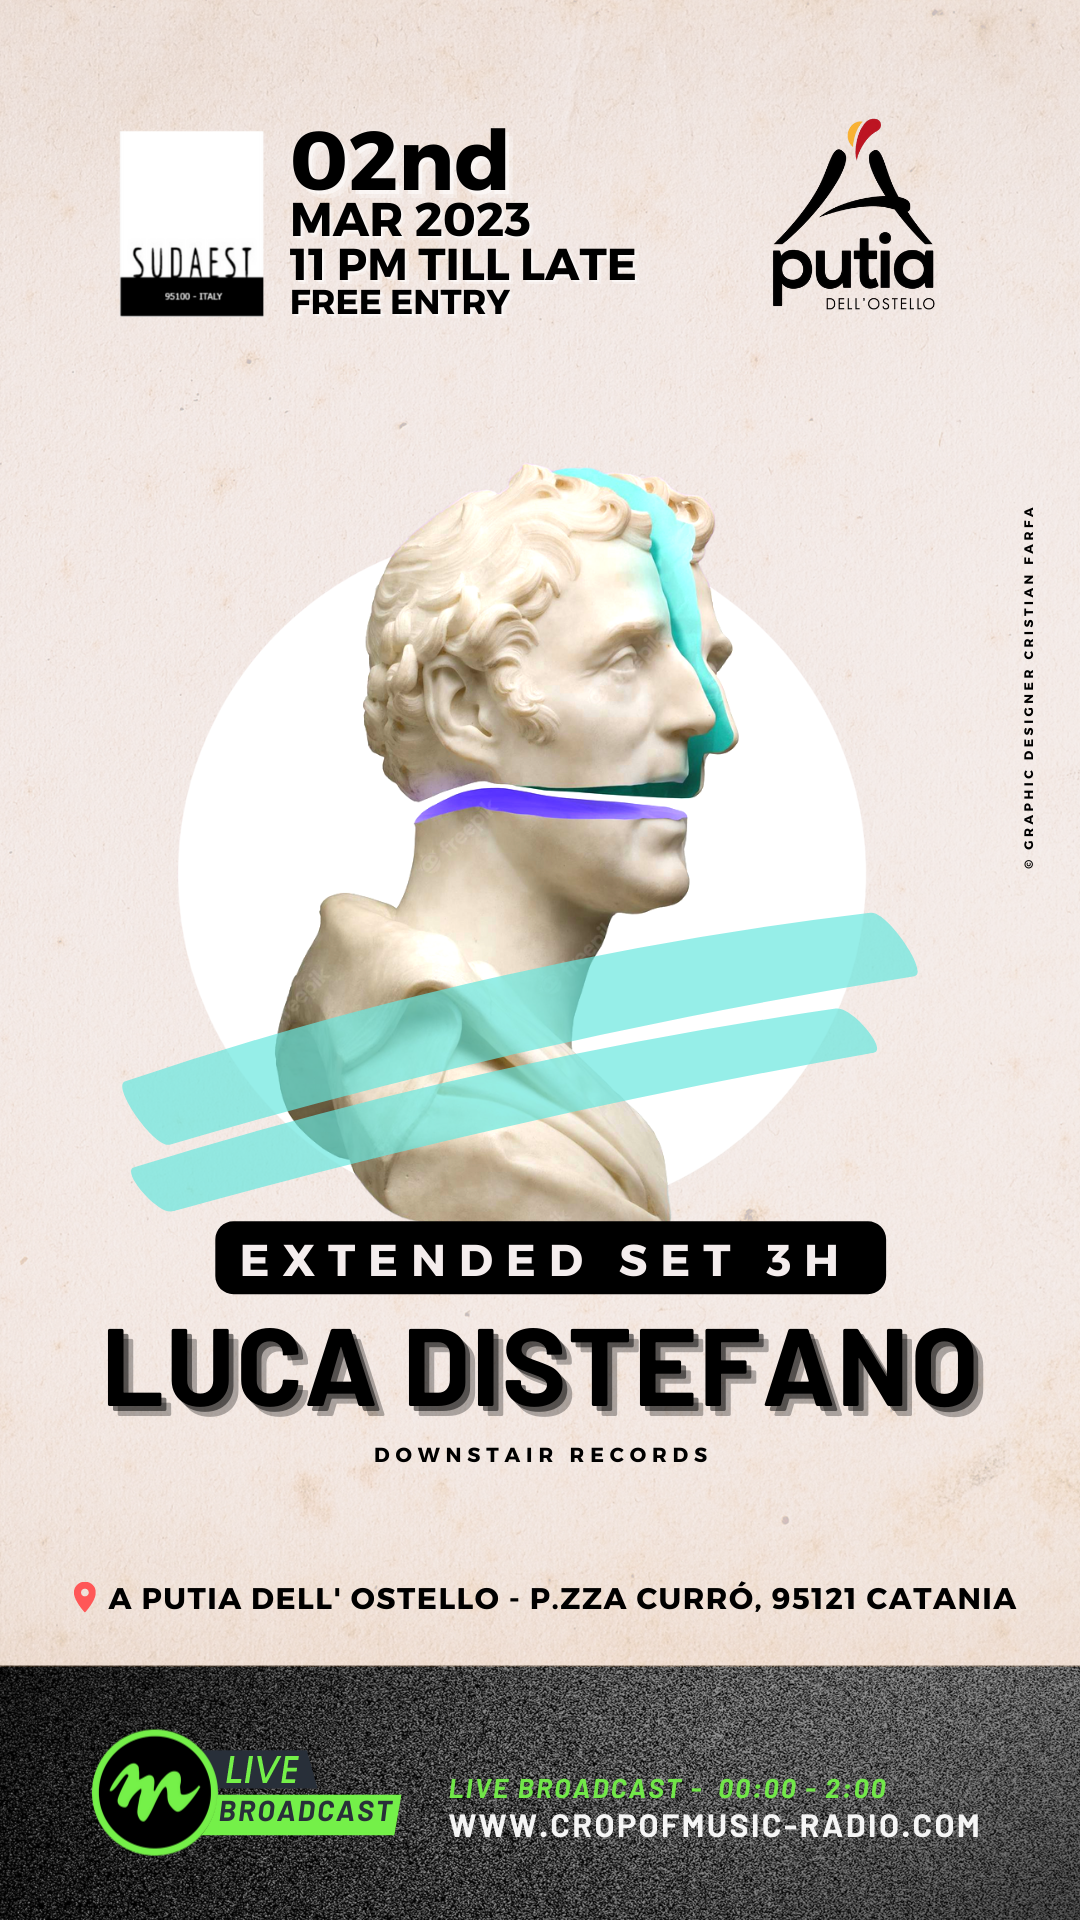 SUDAEST PRES: Luca Distefano 3 H EXTENDED SET at CAVE - フライヤー裏